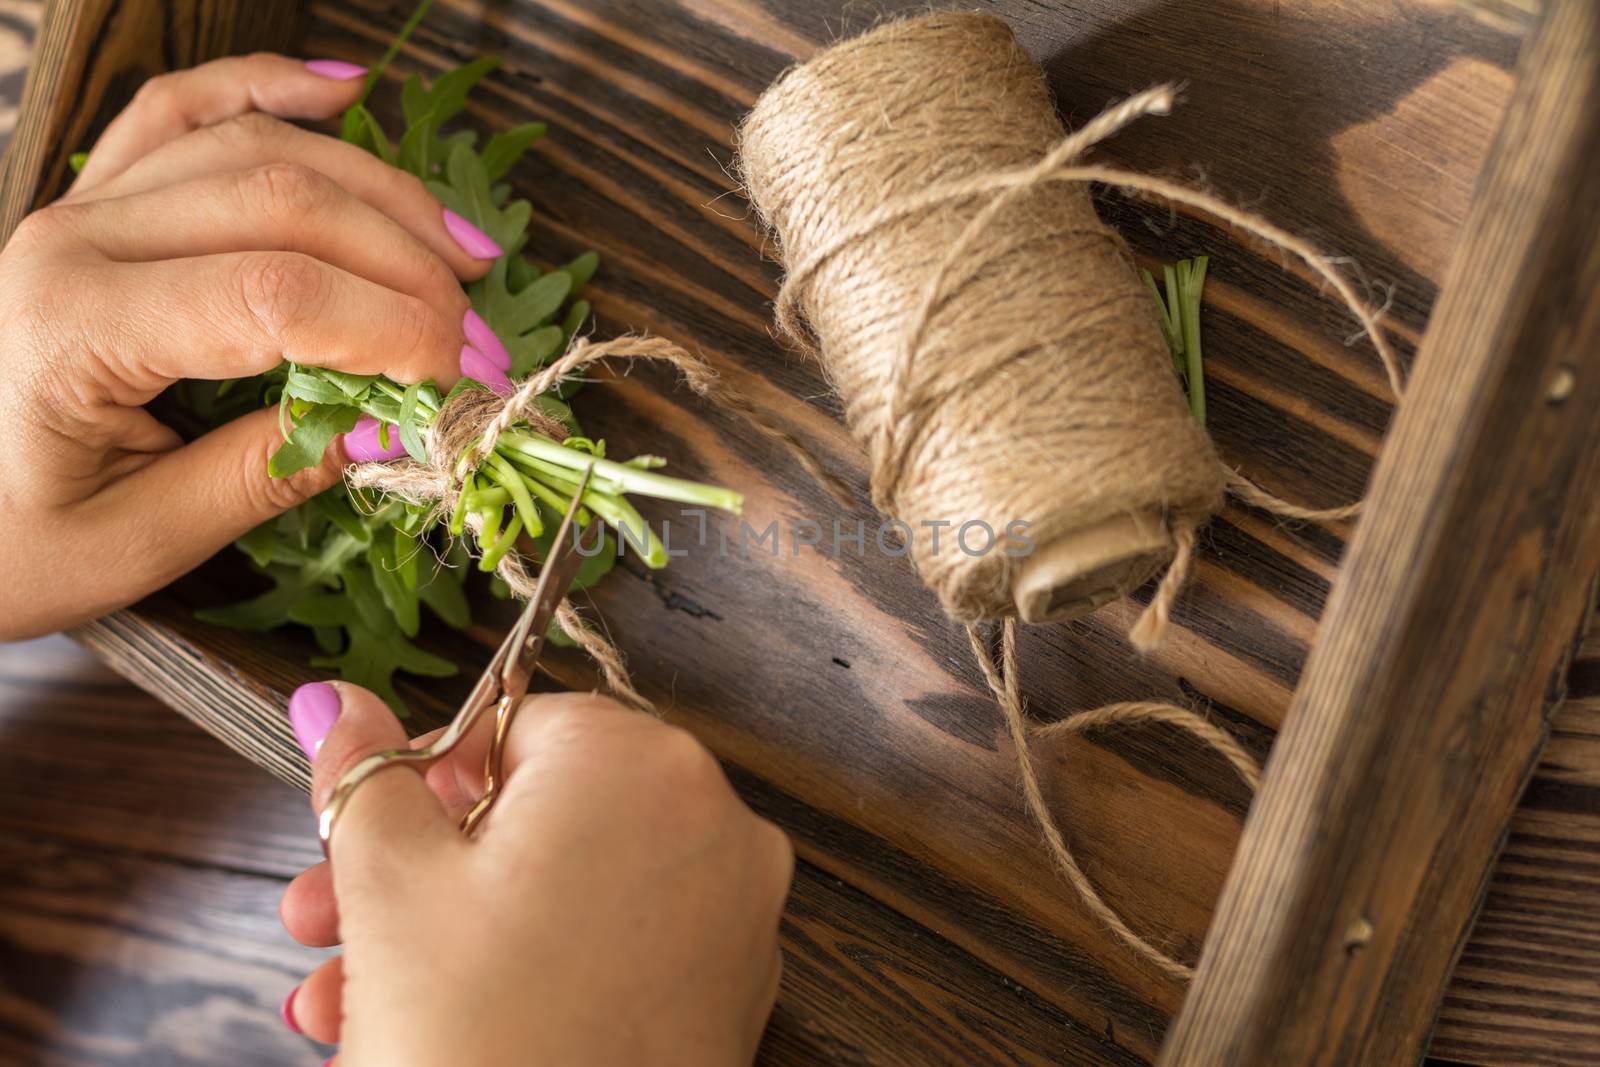 Female hands cutting arugula bunch with scissors over the wooden box . Top view